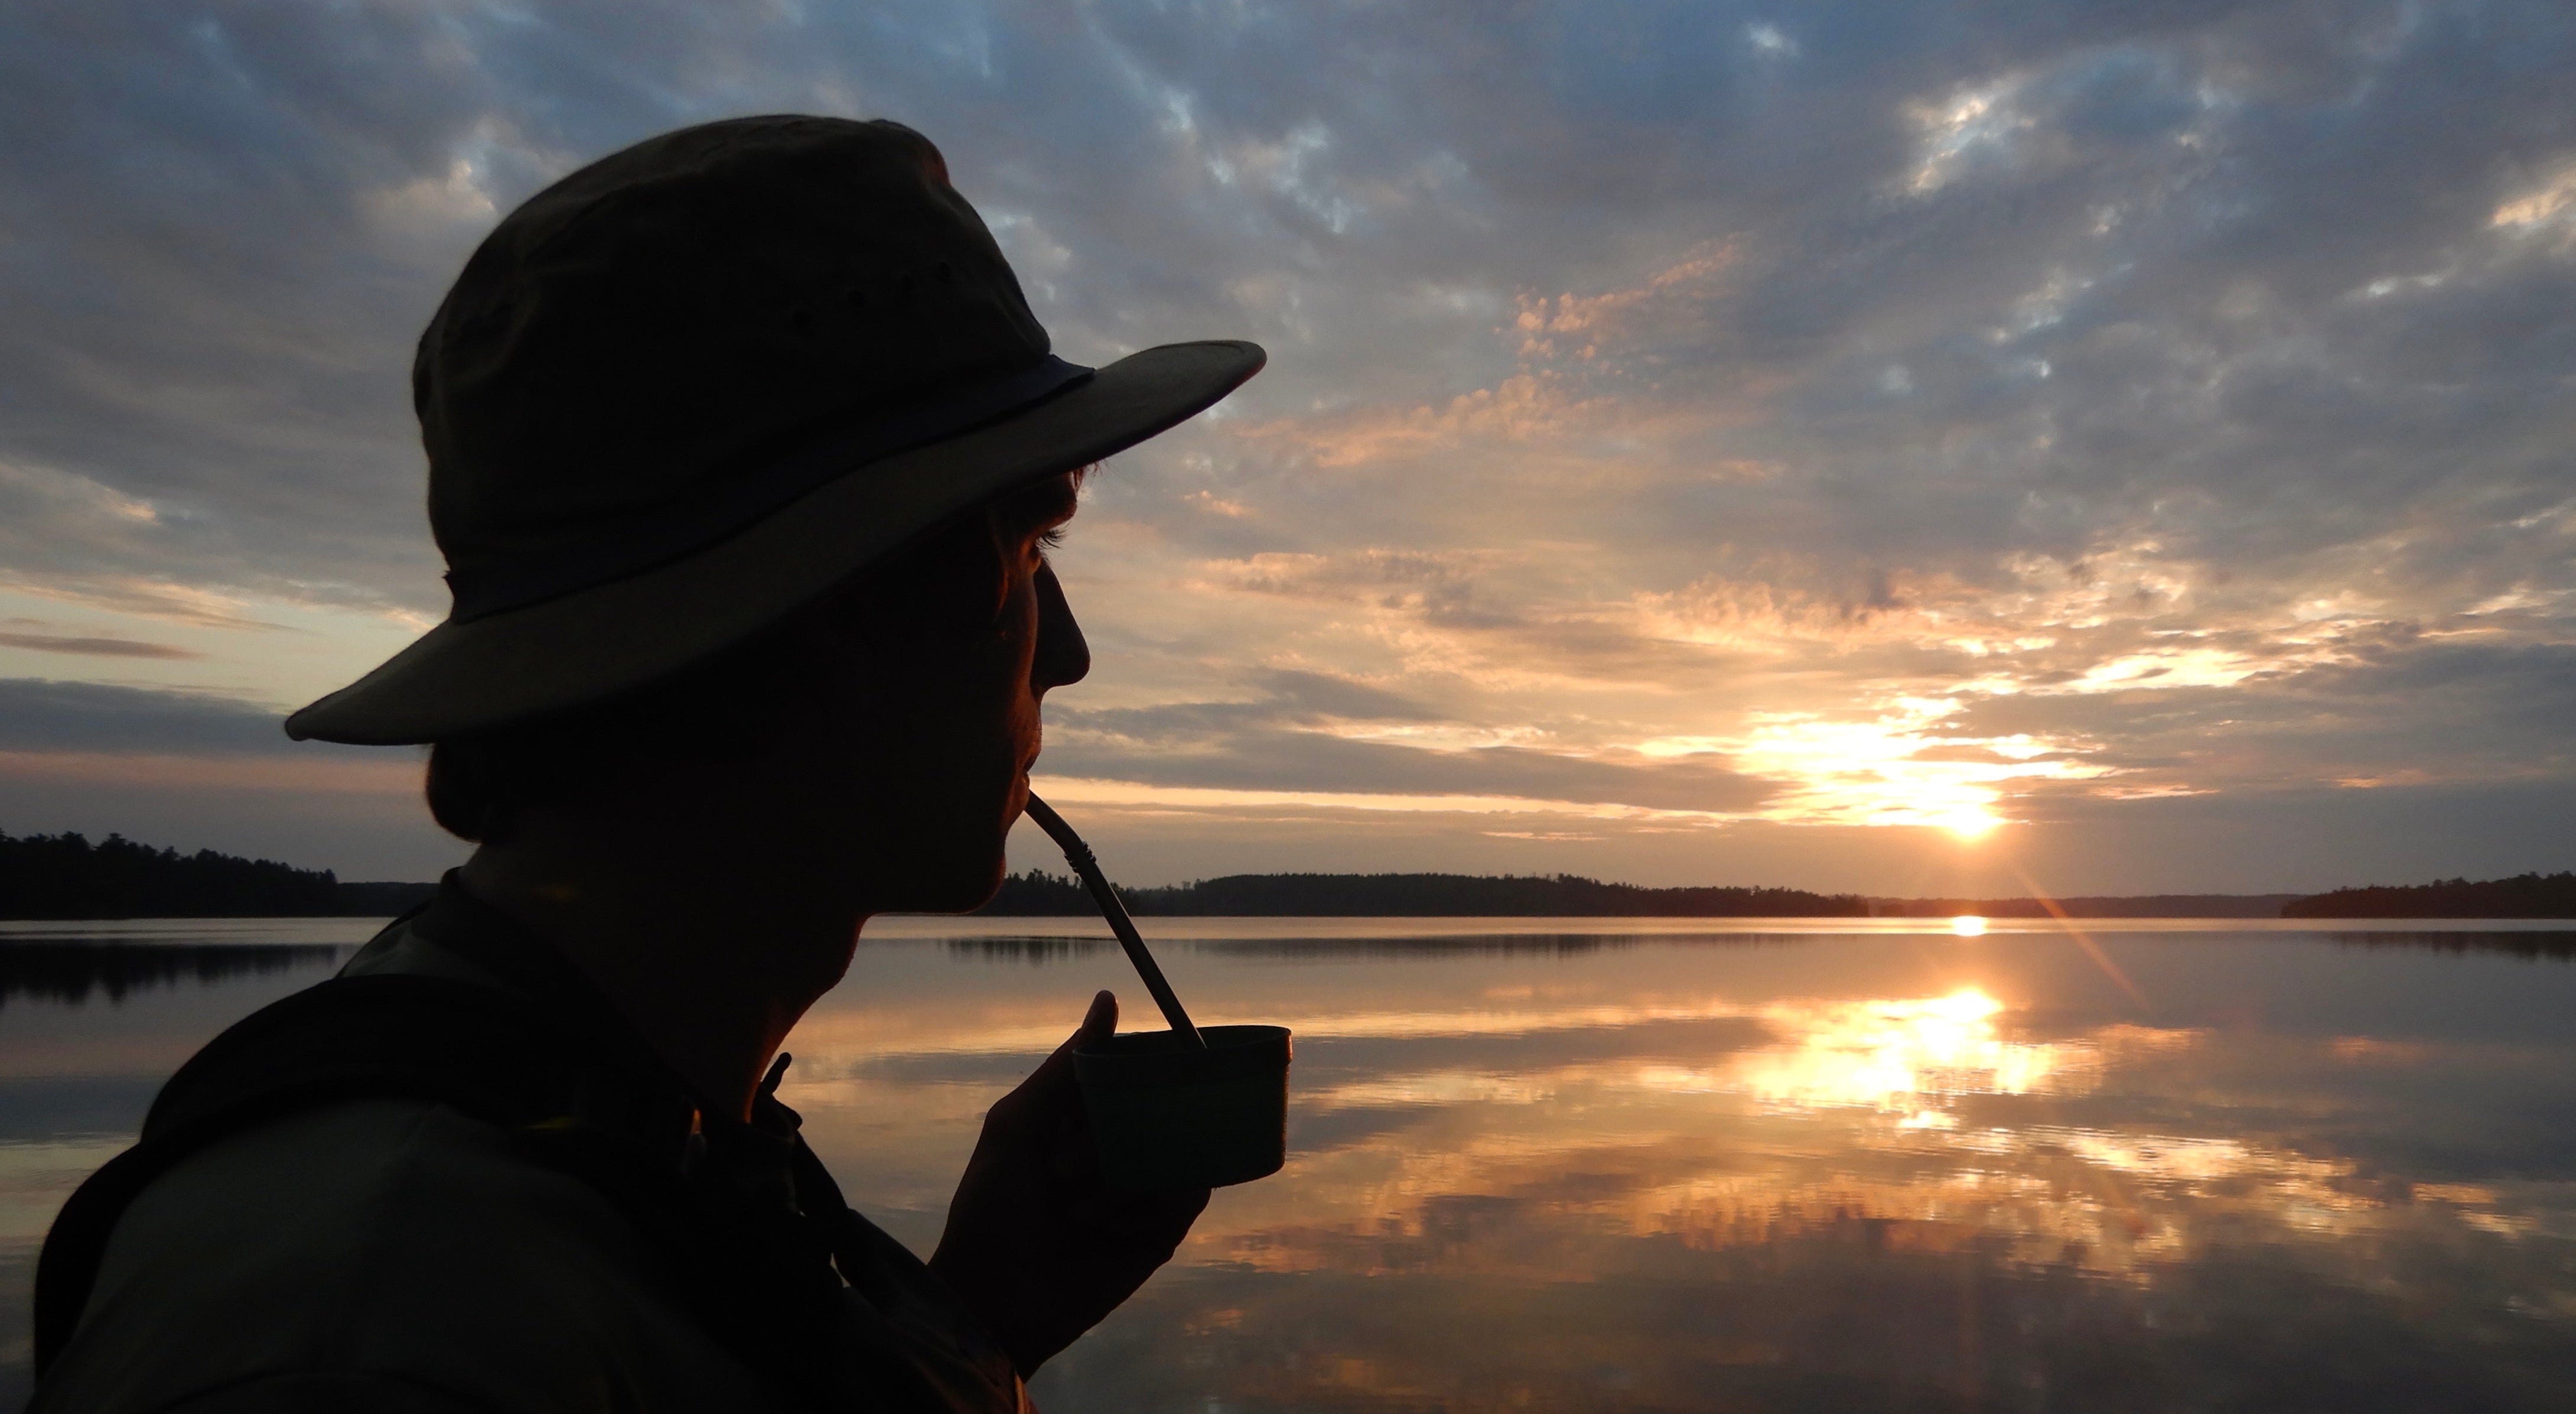 Wilderness coffee maker for canoeing, backpacking, sailing, traveling, and everywhere else. 